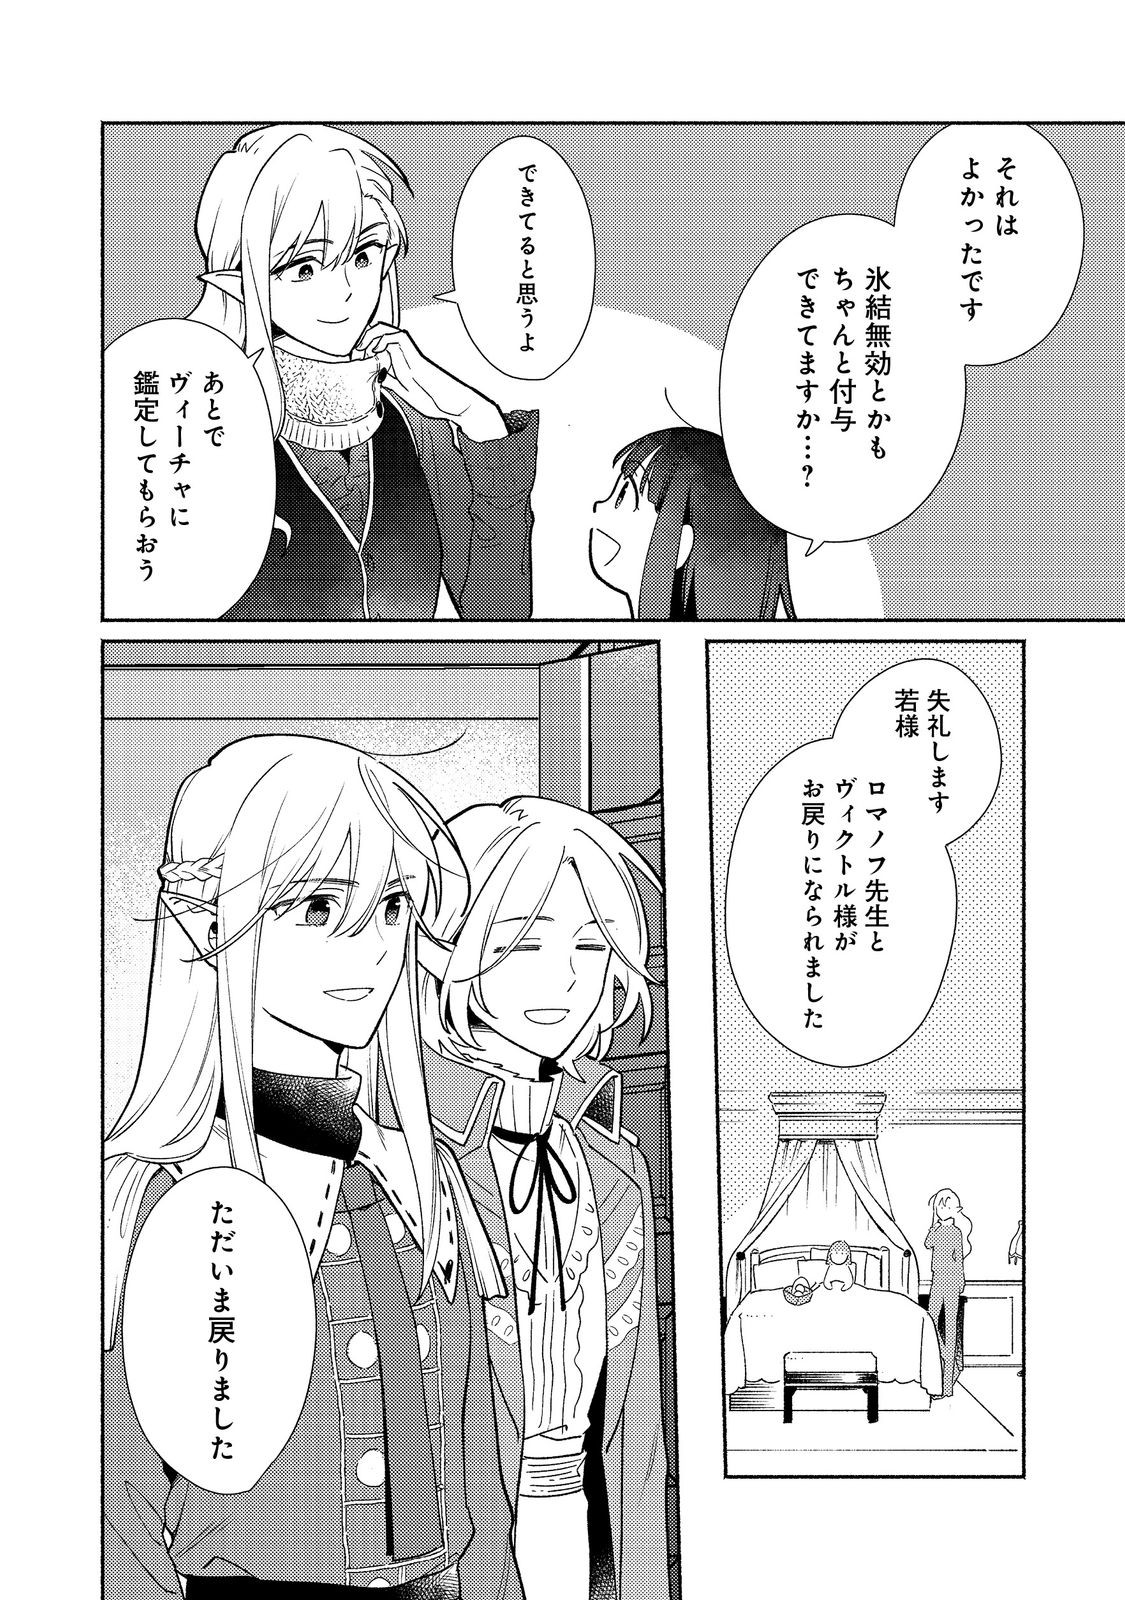 I’m the White Pig Nobleman 第22.2話 - Page 12